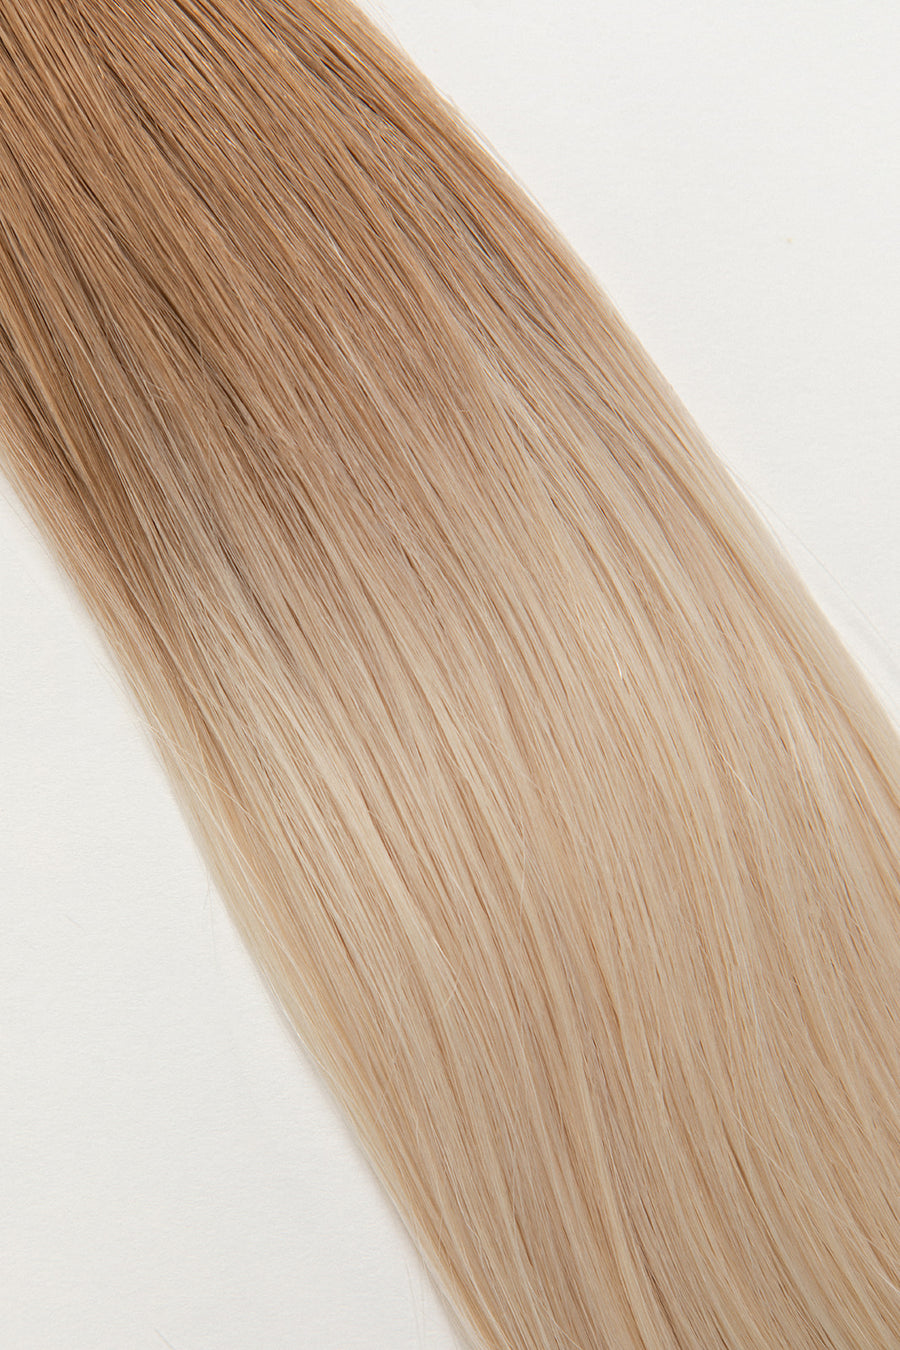 Vetiver Vanilla is our icy blonde, blended out from a Sand root.  Stylist lingo: Natural rooted level 8 blended into an icy level 10  Harloc Tape-In Extensions are made from ethically sourced, premium, Remy Slavic Hair. These reusable hair extensions can be used to add length, volume, chemical-free colour, or to correct or enhance a haircut. Available in 16 beautiful shades. Combine multiple colours to create a custom colour blend and perfect match.